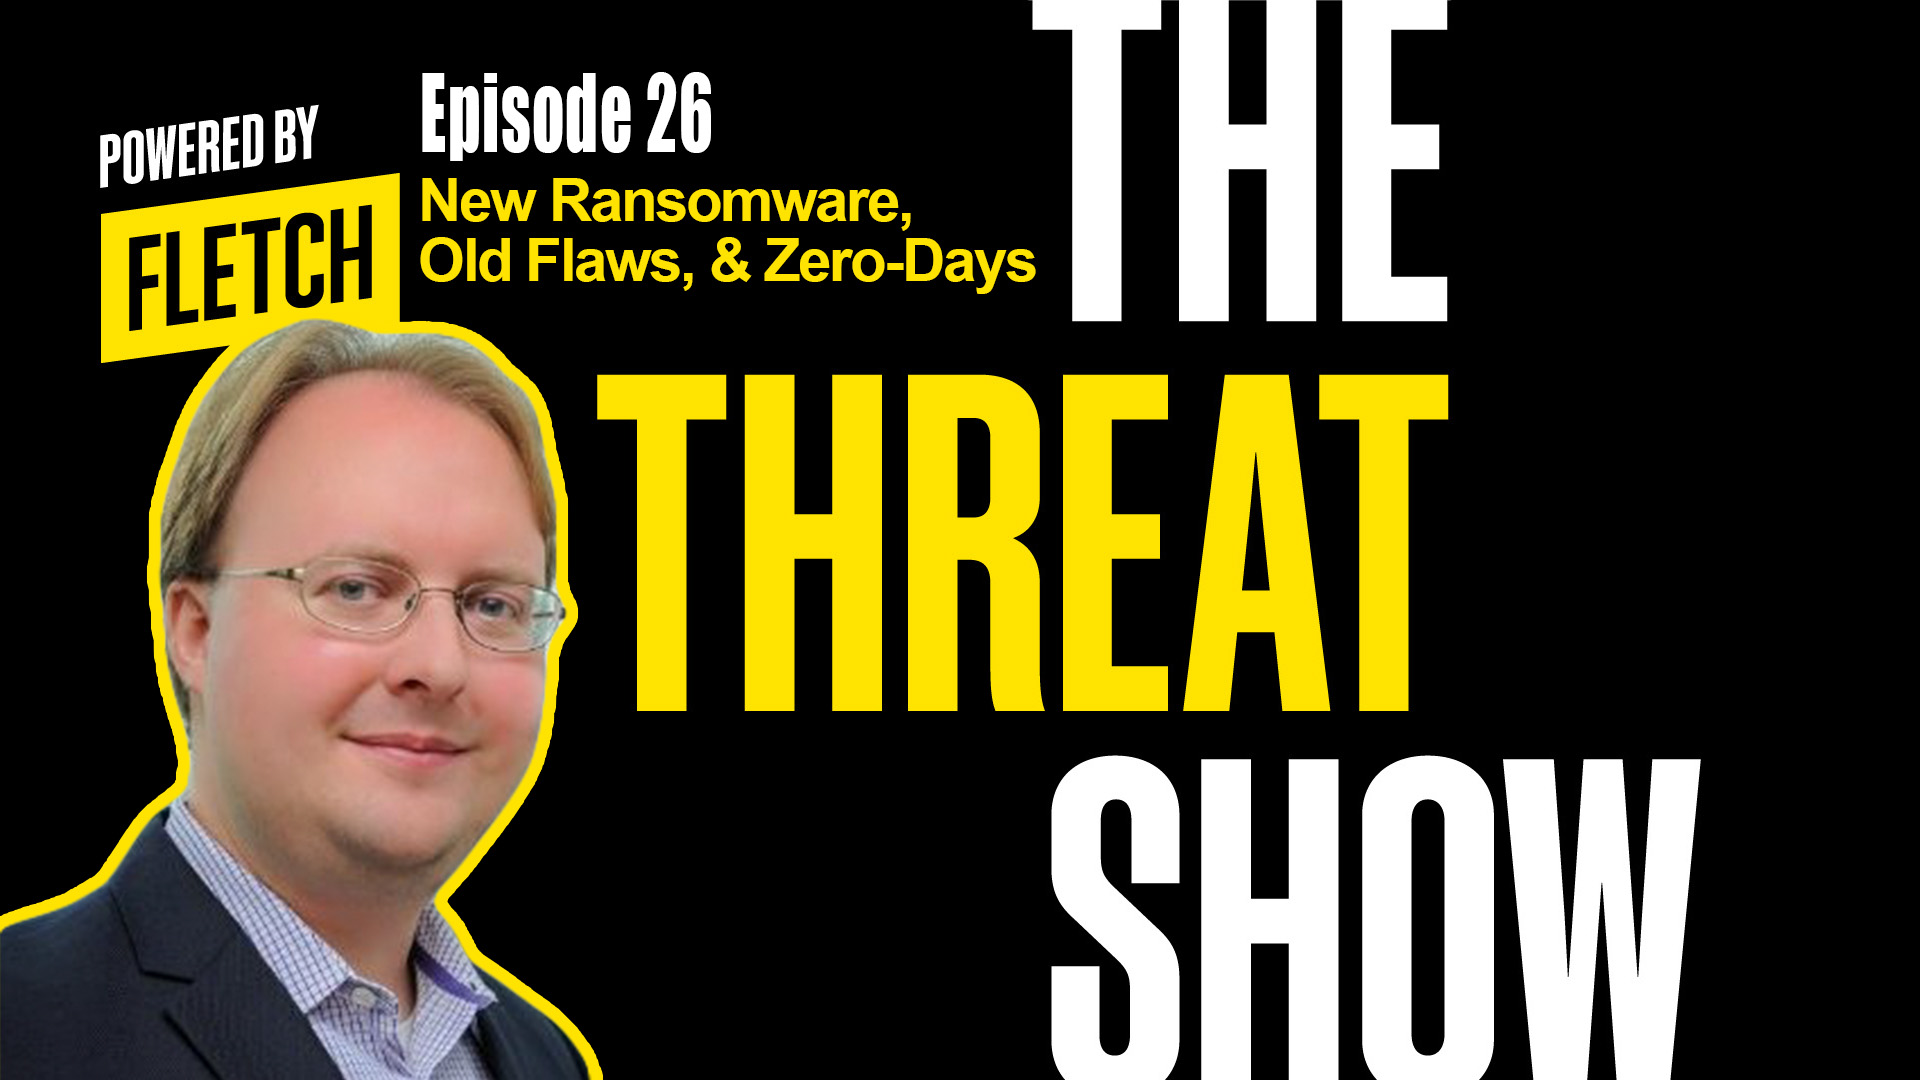 The Threat Show Ep. 26